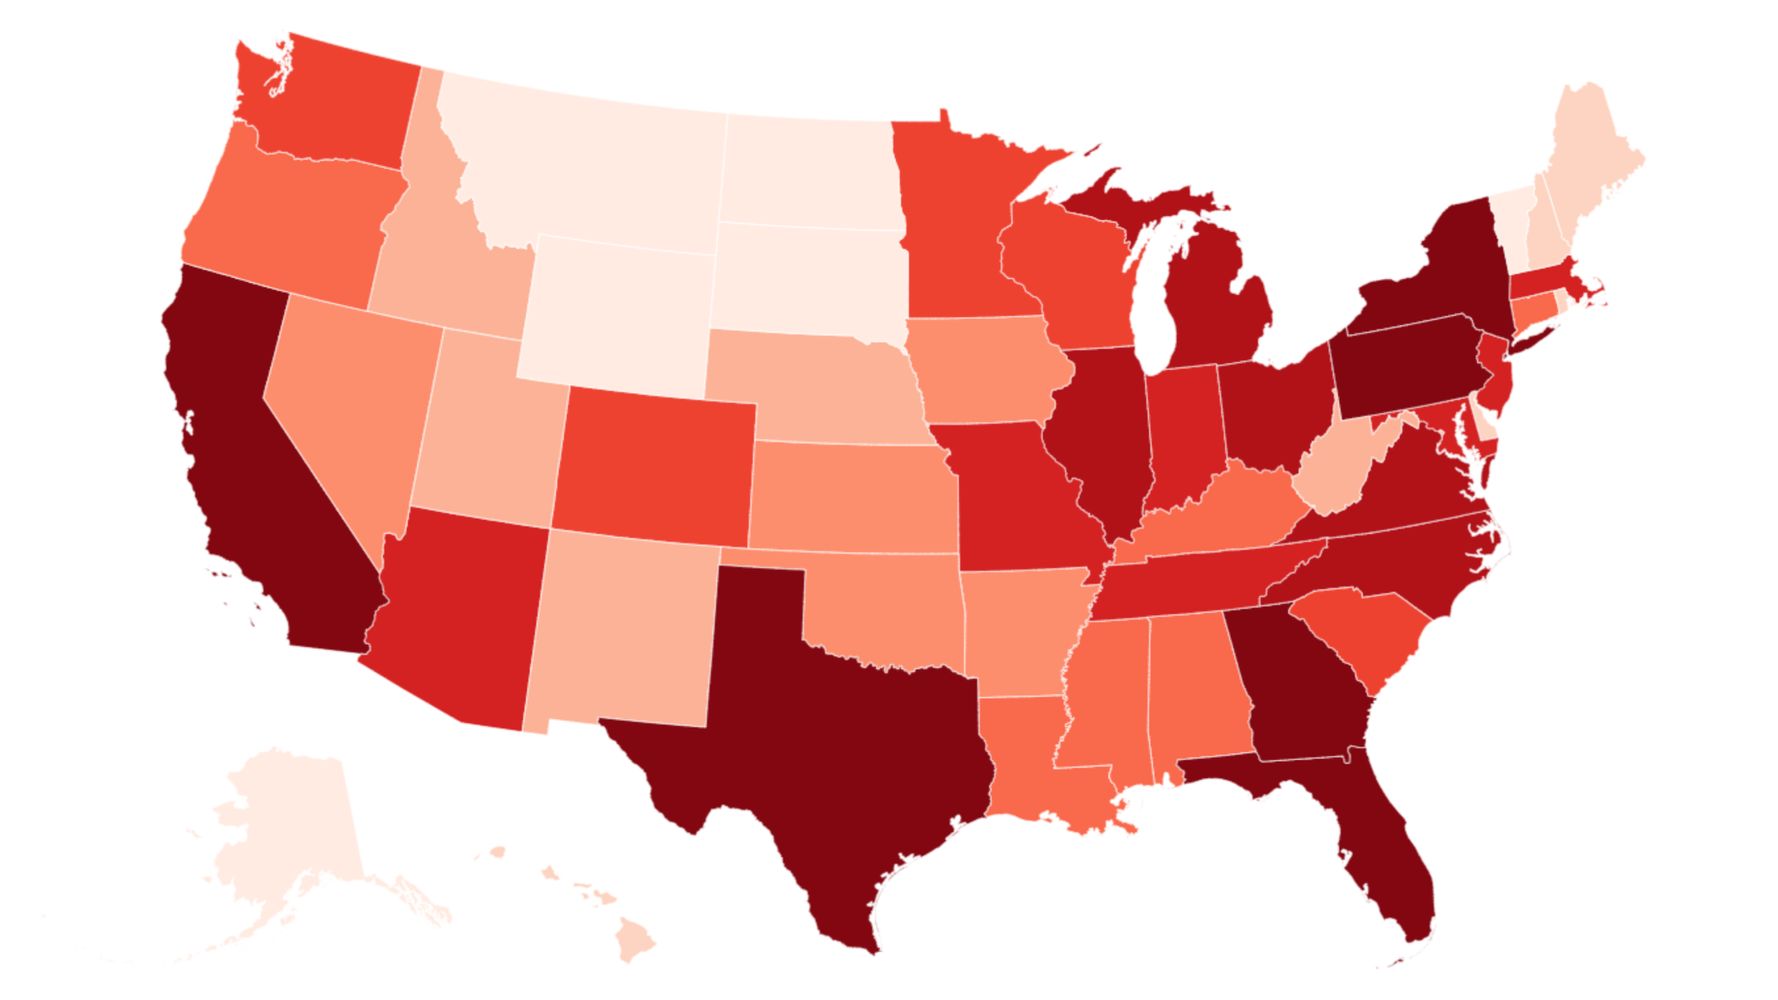 What’s The Average Student Loan Debt By State? This Map Breaks It Down.